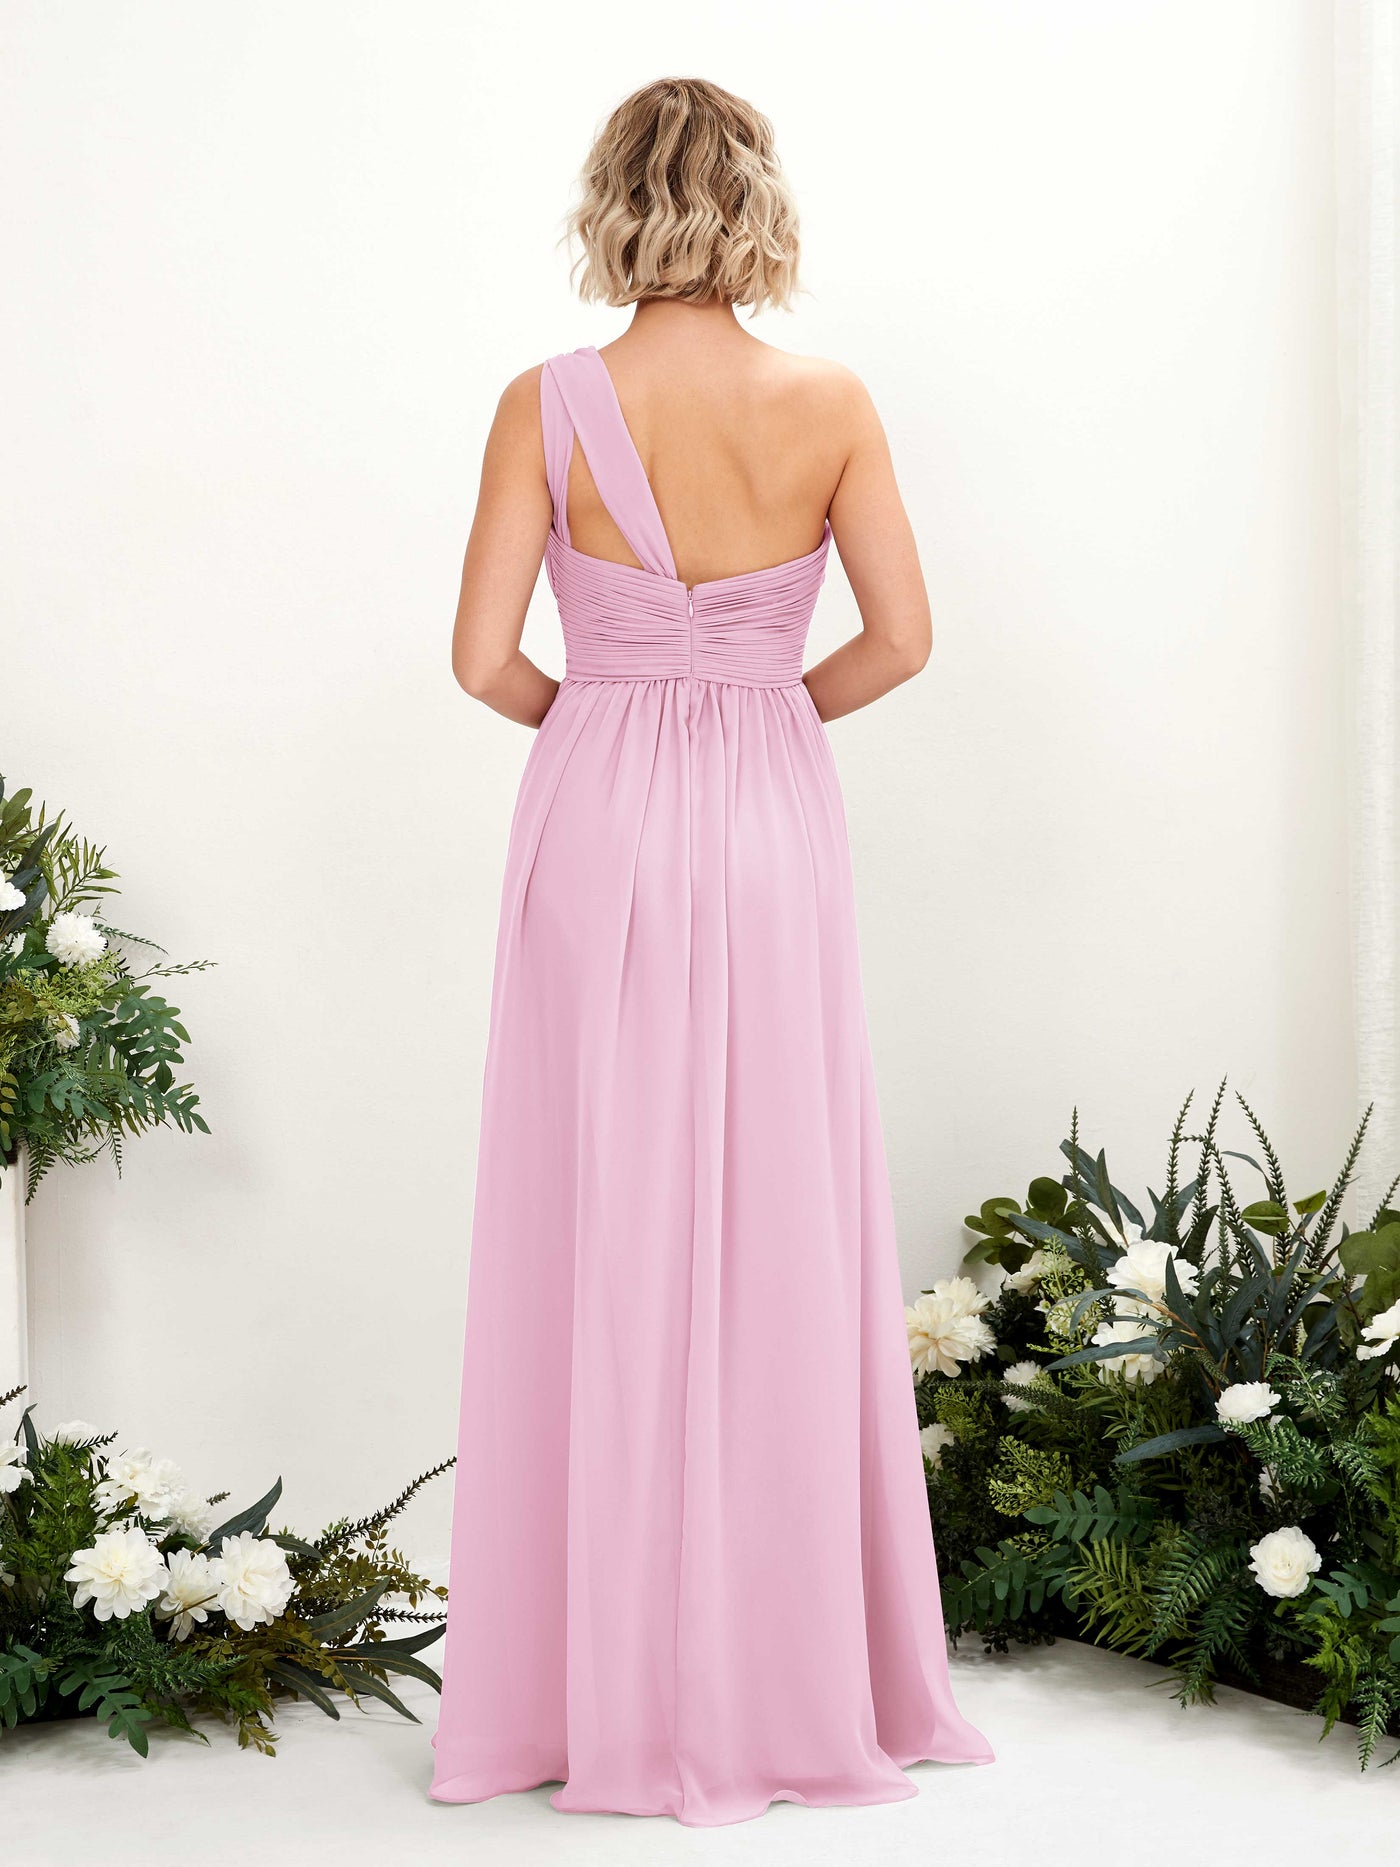 Candy Pink Bridesmaid Dresses Bridesmaid Dress Ball Gown Chiffon One Shoulder Full Length Sleeveless Wedding Party Dress (81225039)#color_candy-pink